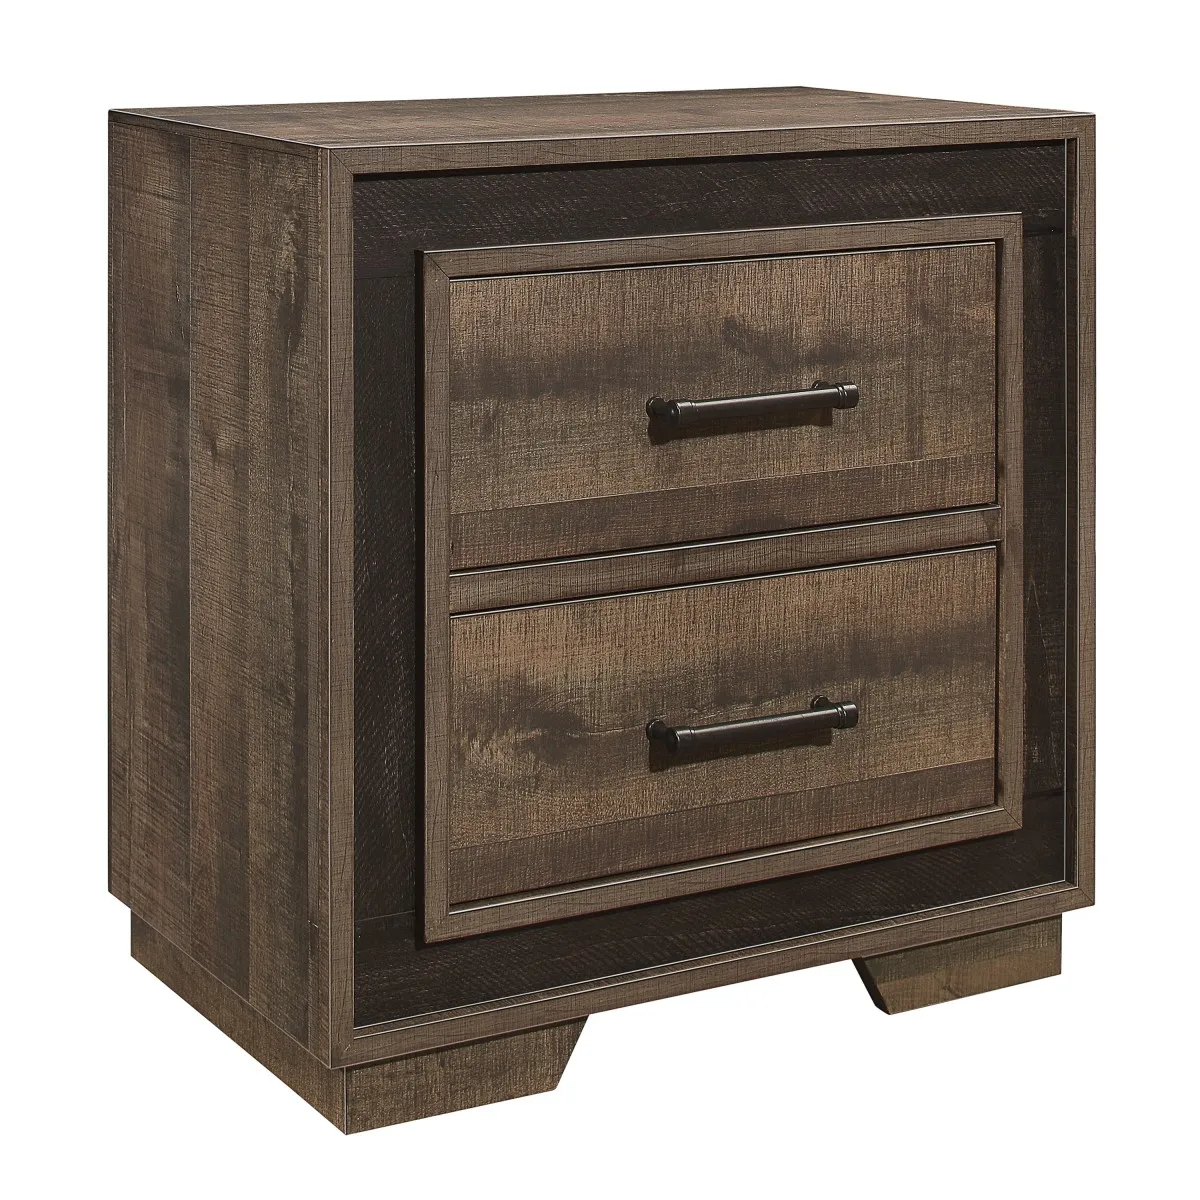 Rustic Style 1pc Nightstand Two-Tone Finish Embossed Faux-Wood Bedside Table Bedroom Furniture